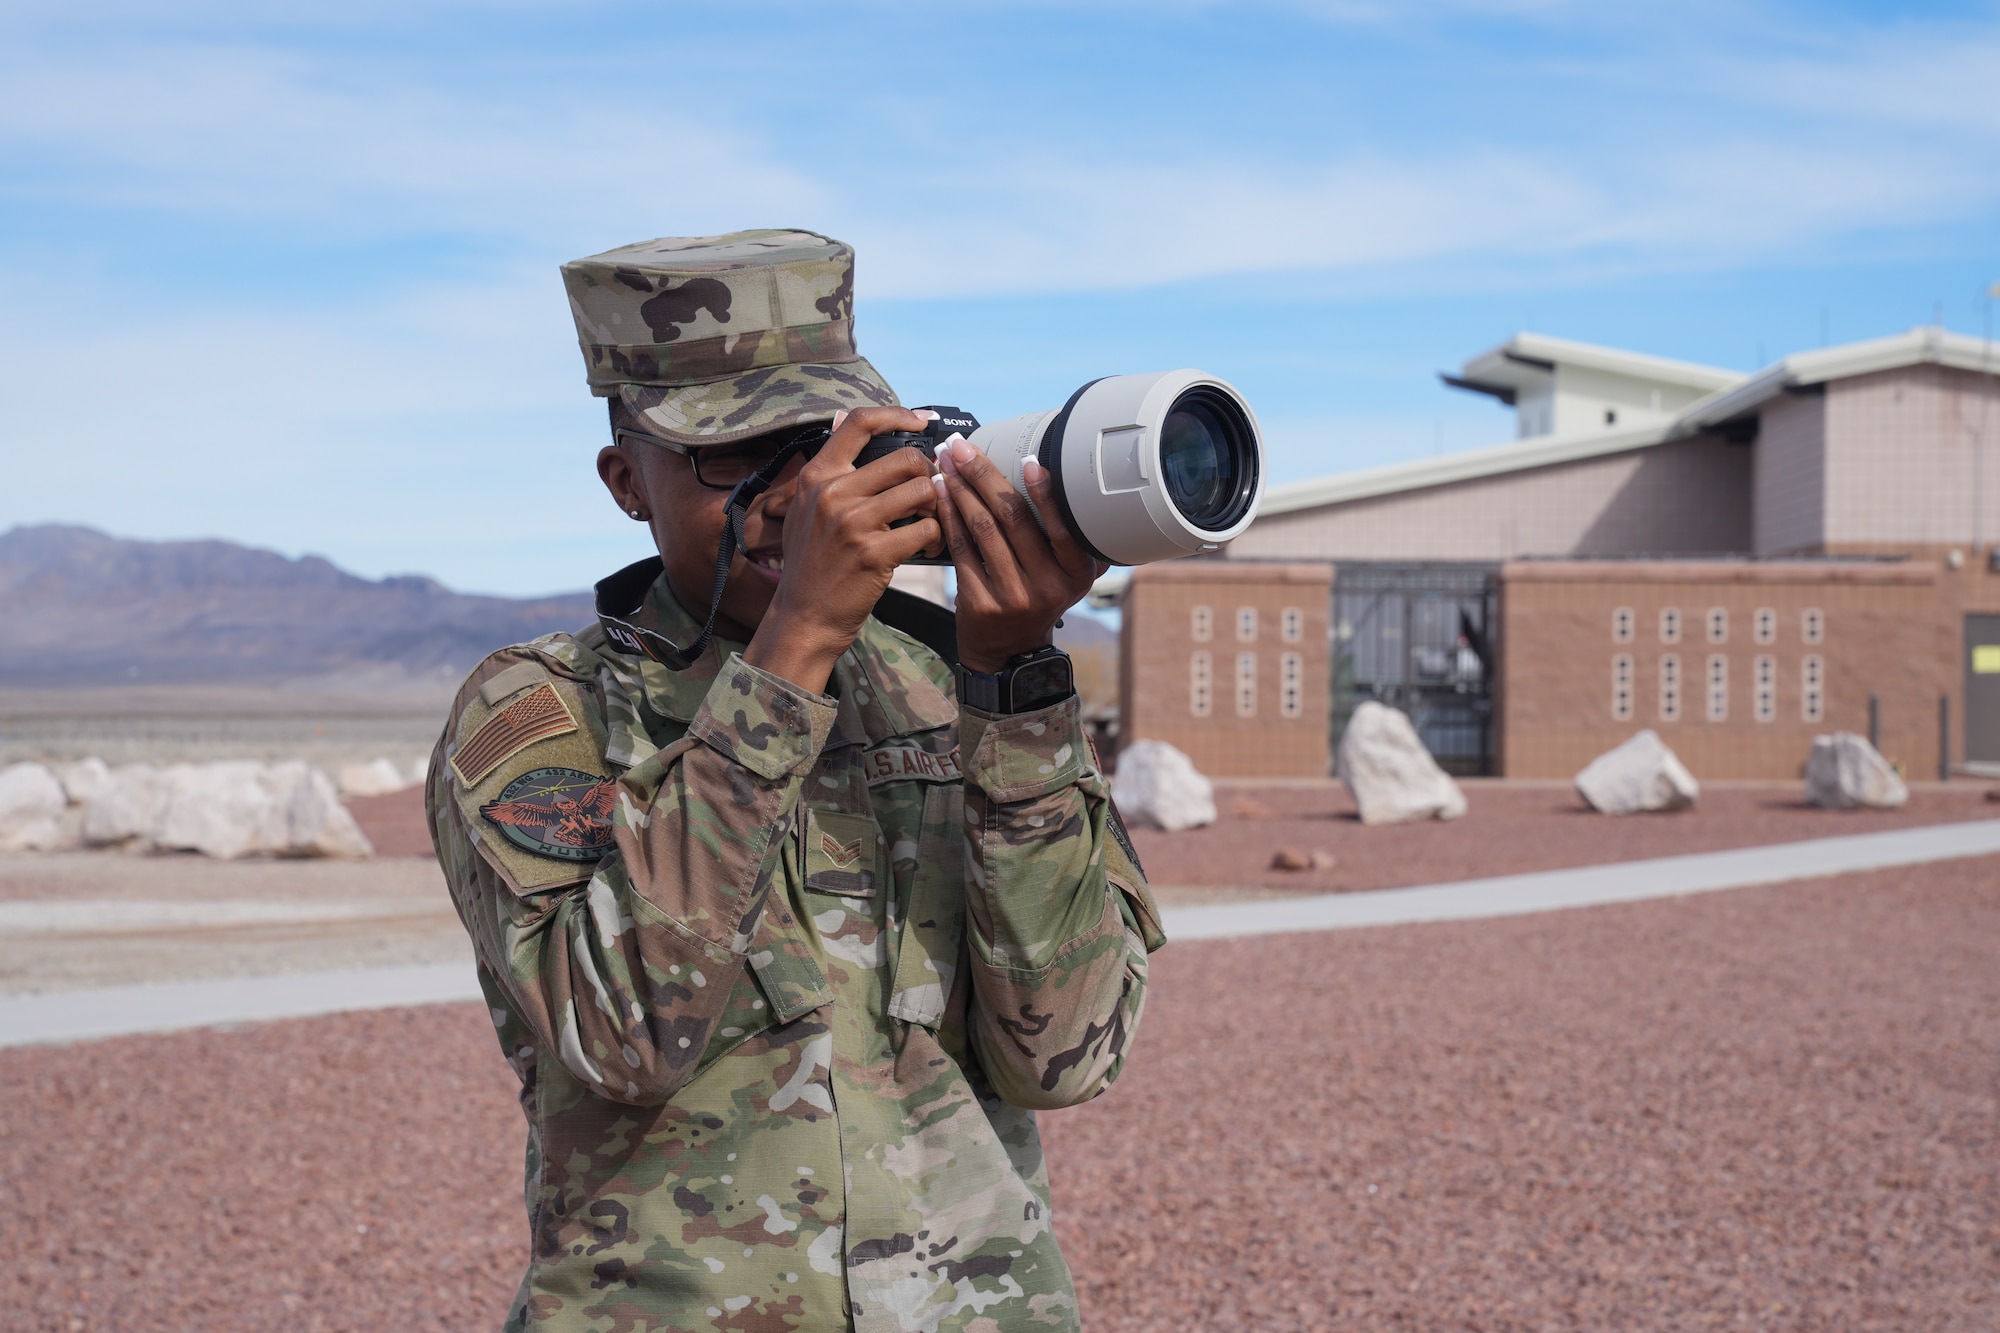 An airman taking a photo with a camera.